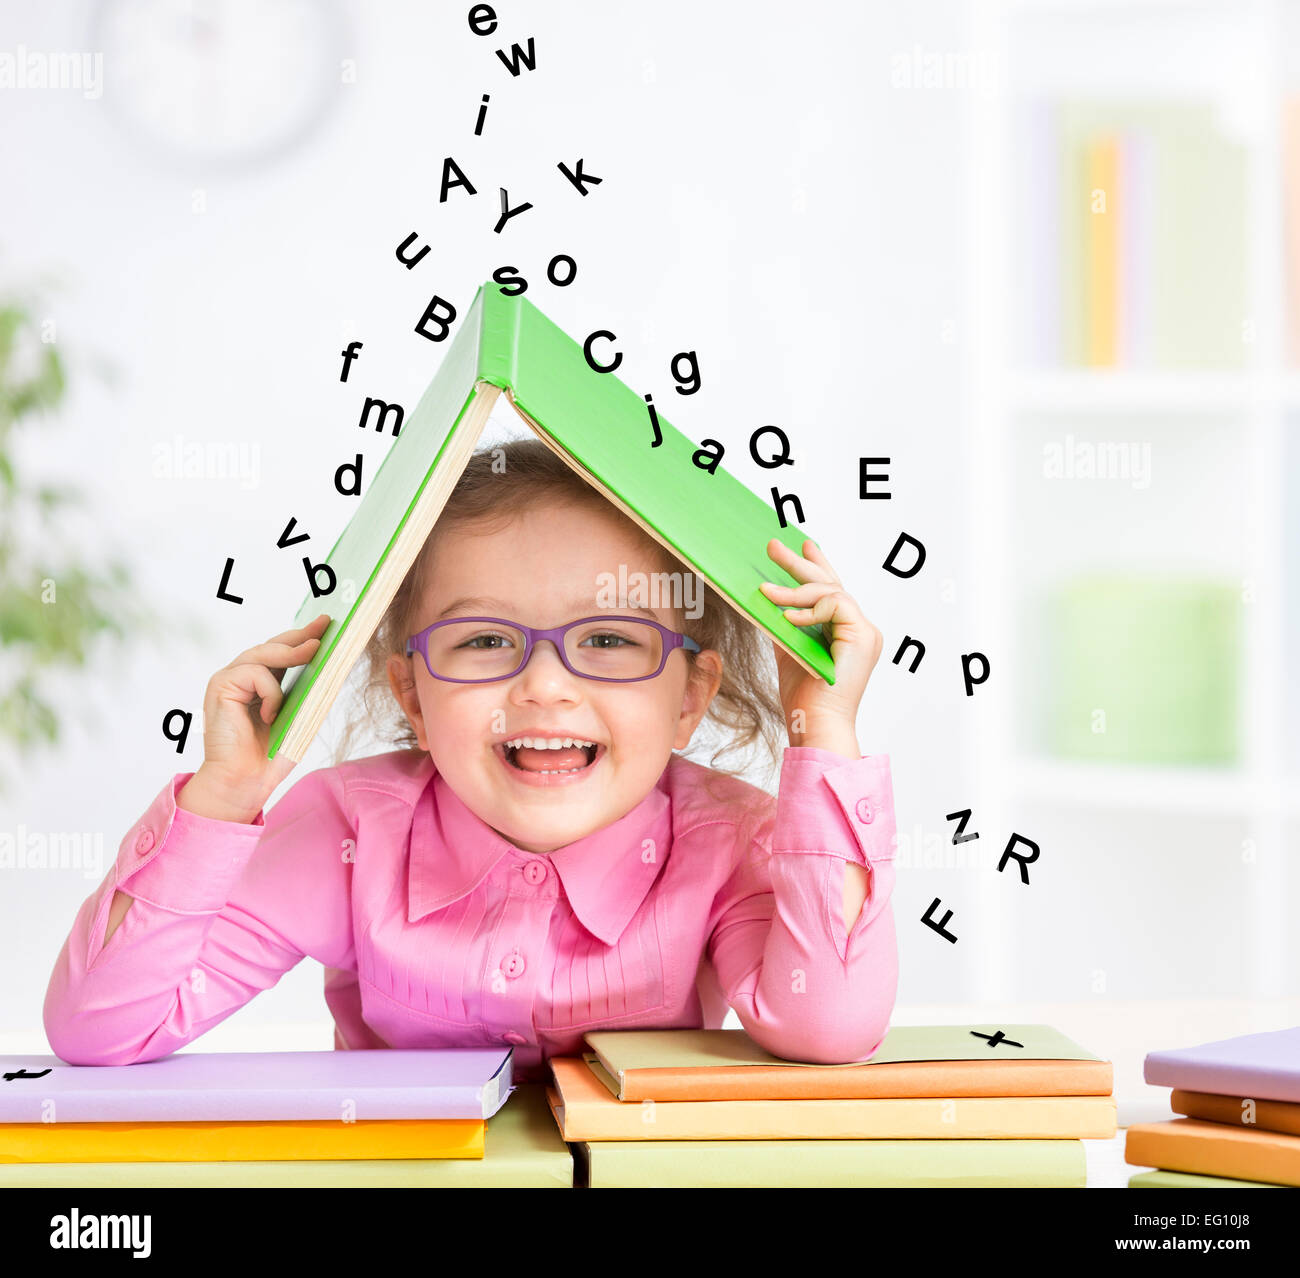 Smart smiling kid in glasses taking refuge under book roof from falling letters Stock Photo